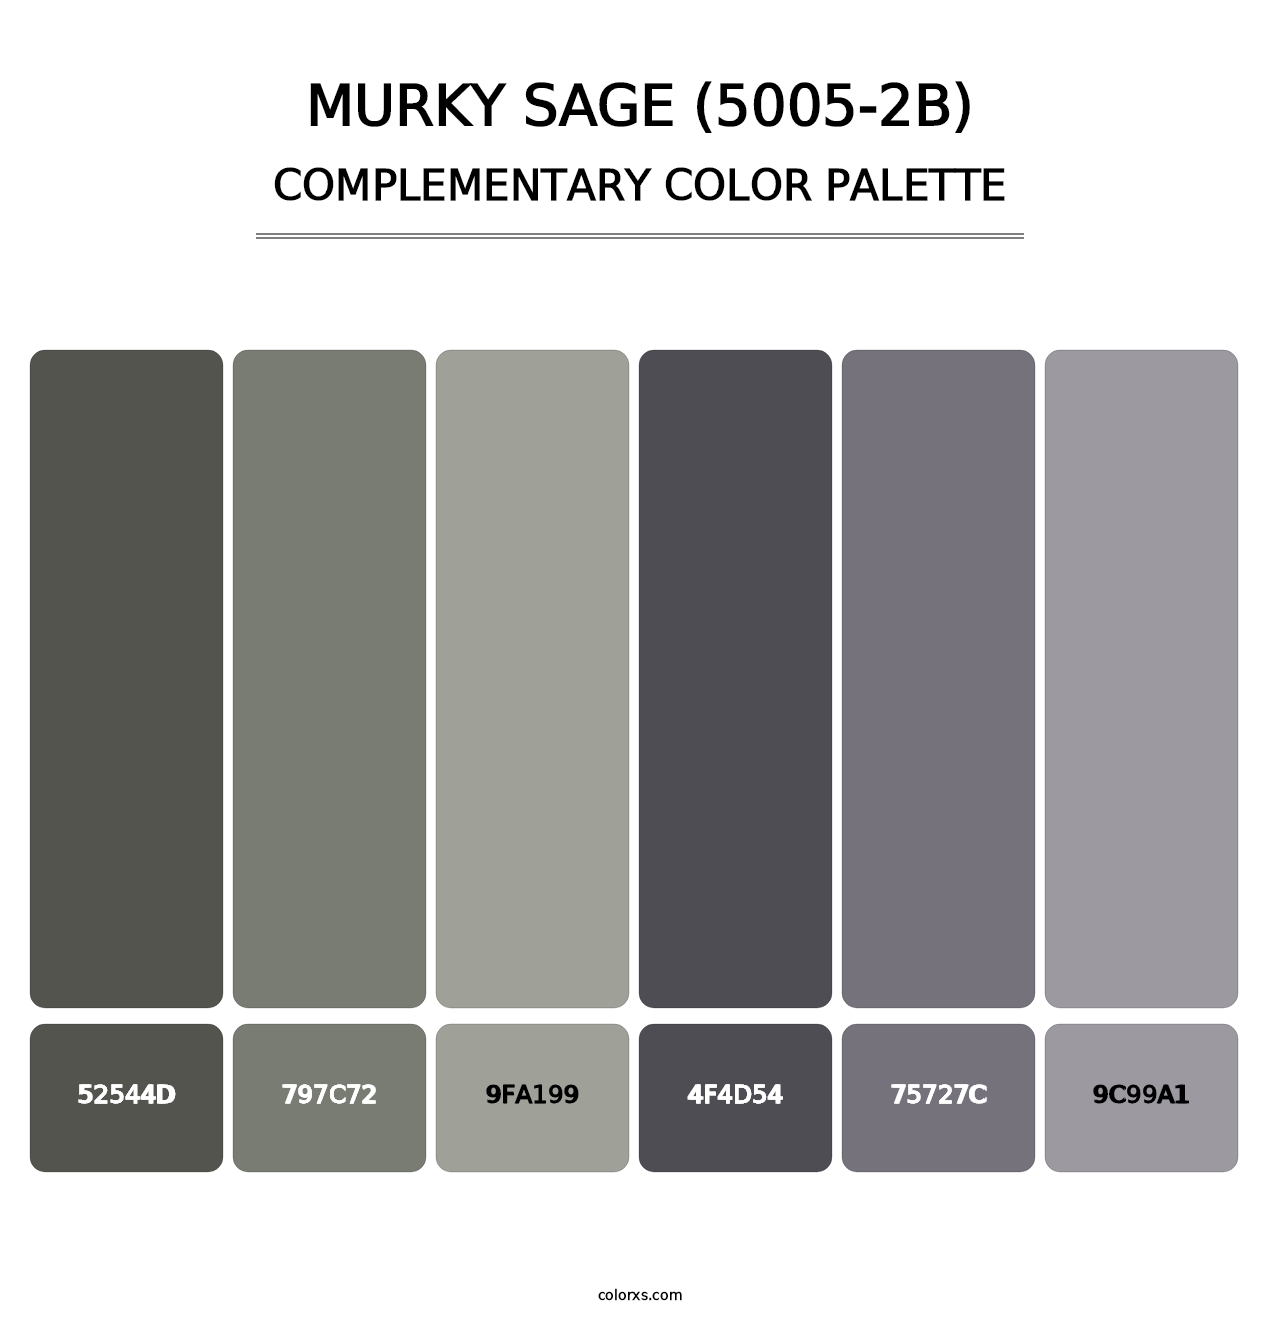 Murky Sage (5005-2B) - Complementary Color Palette